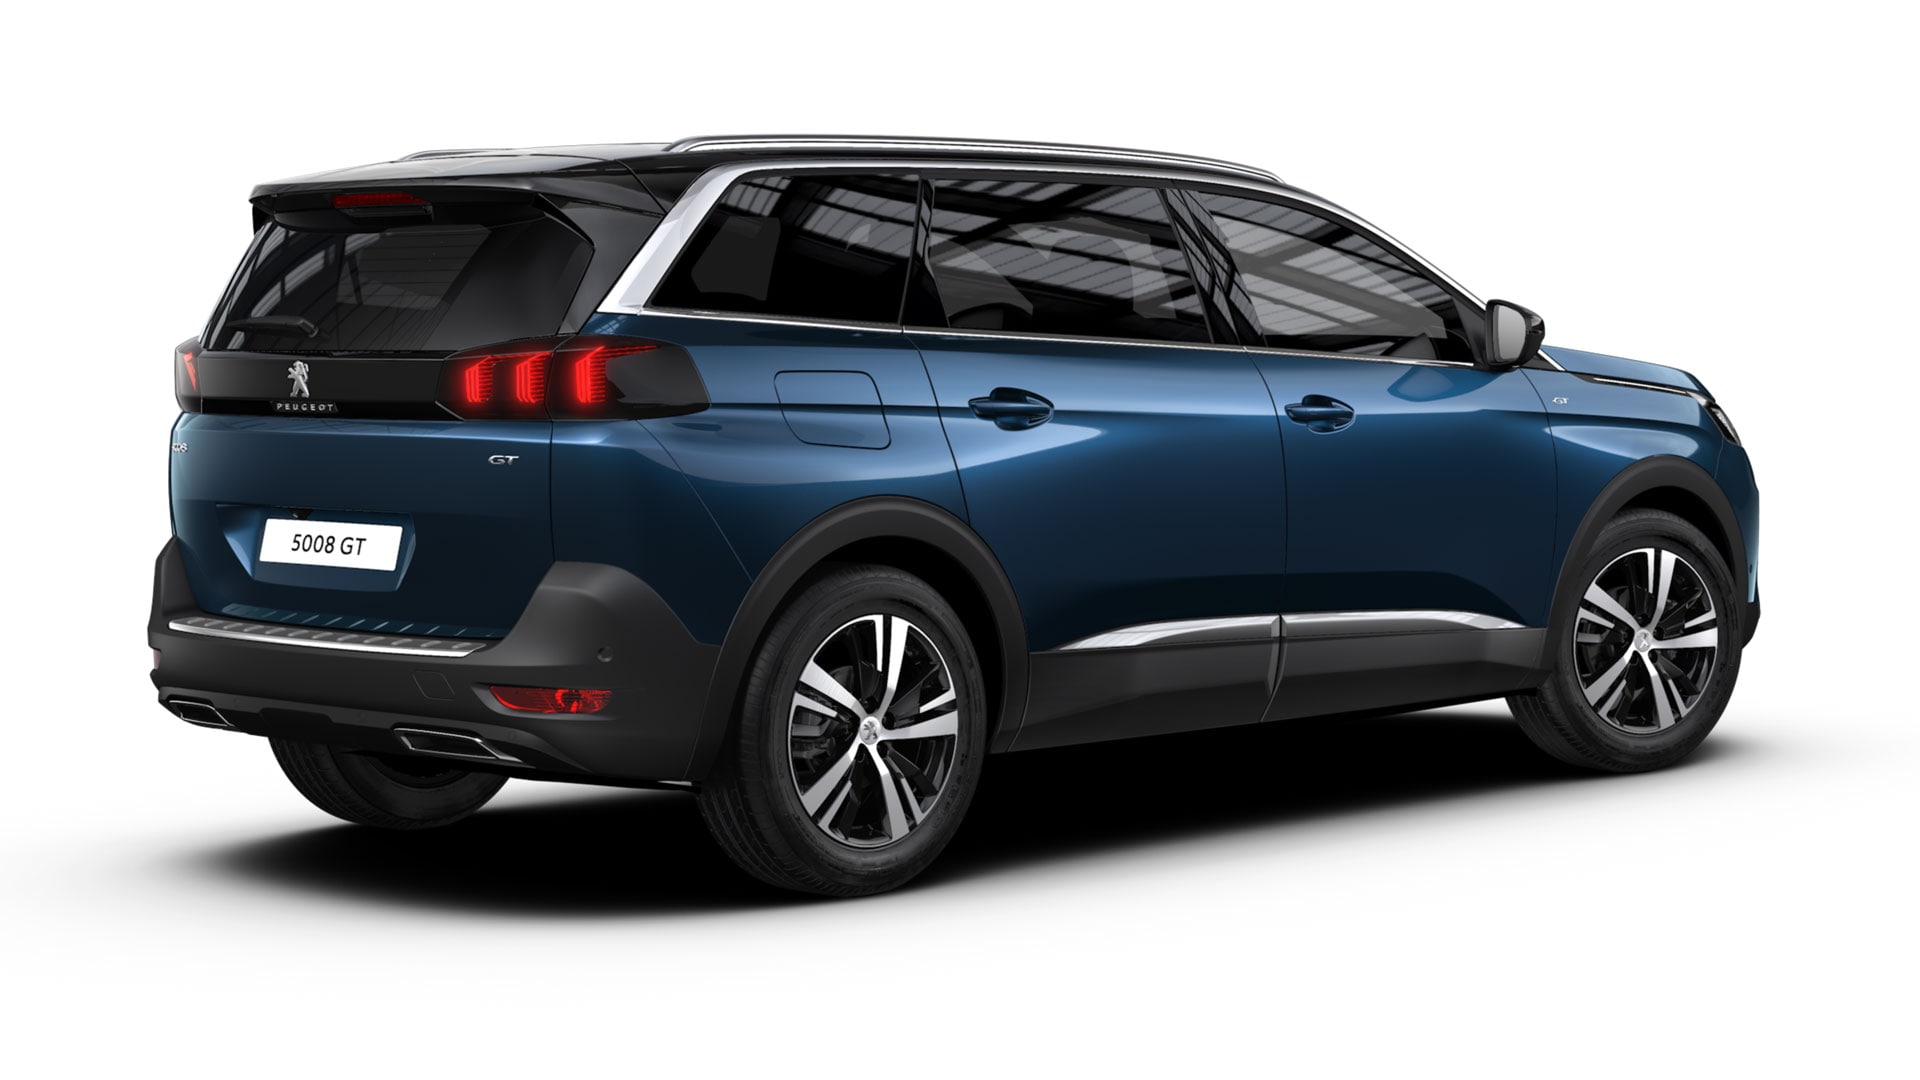 File:2018 Peugeot 5008 Allure Automatic 1.2 Front.jpg - Wikipedia